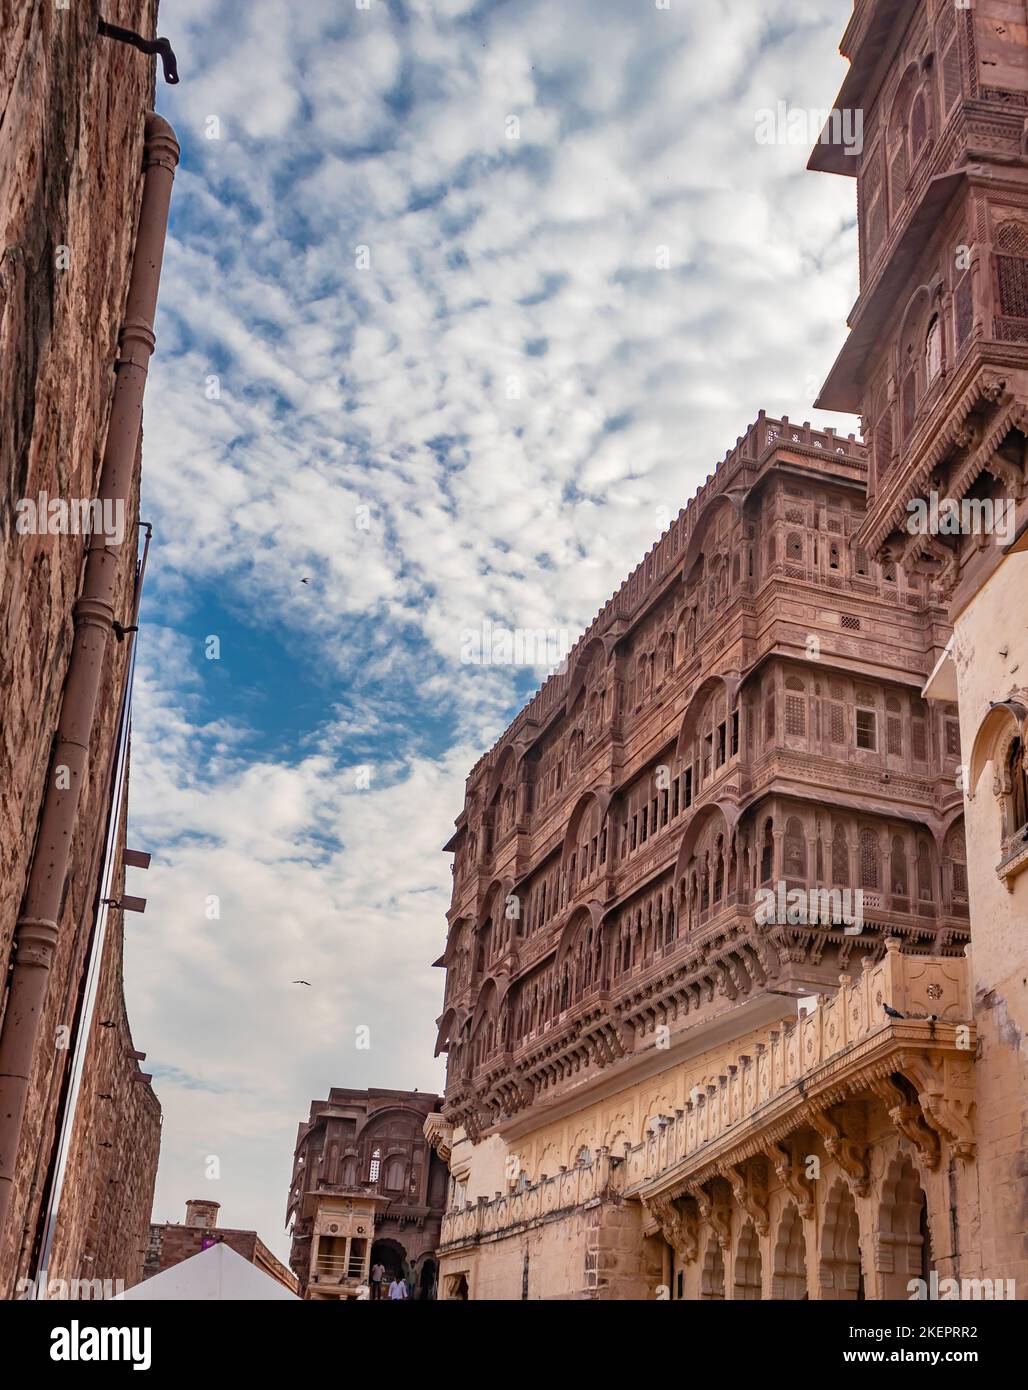 mehrangarh fort ancient king fort artistic design with bright blue sky from different angle Stock Photo